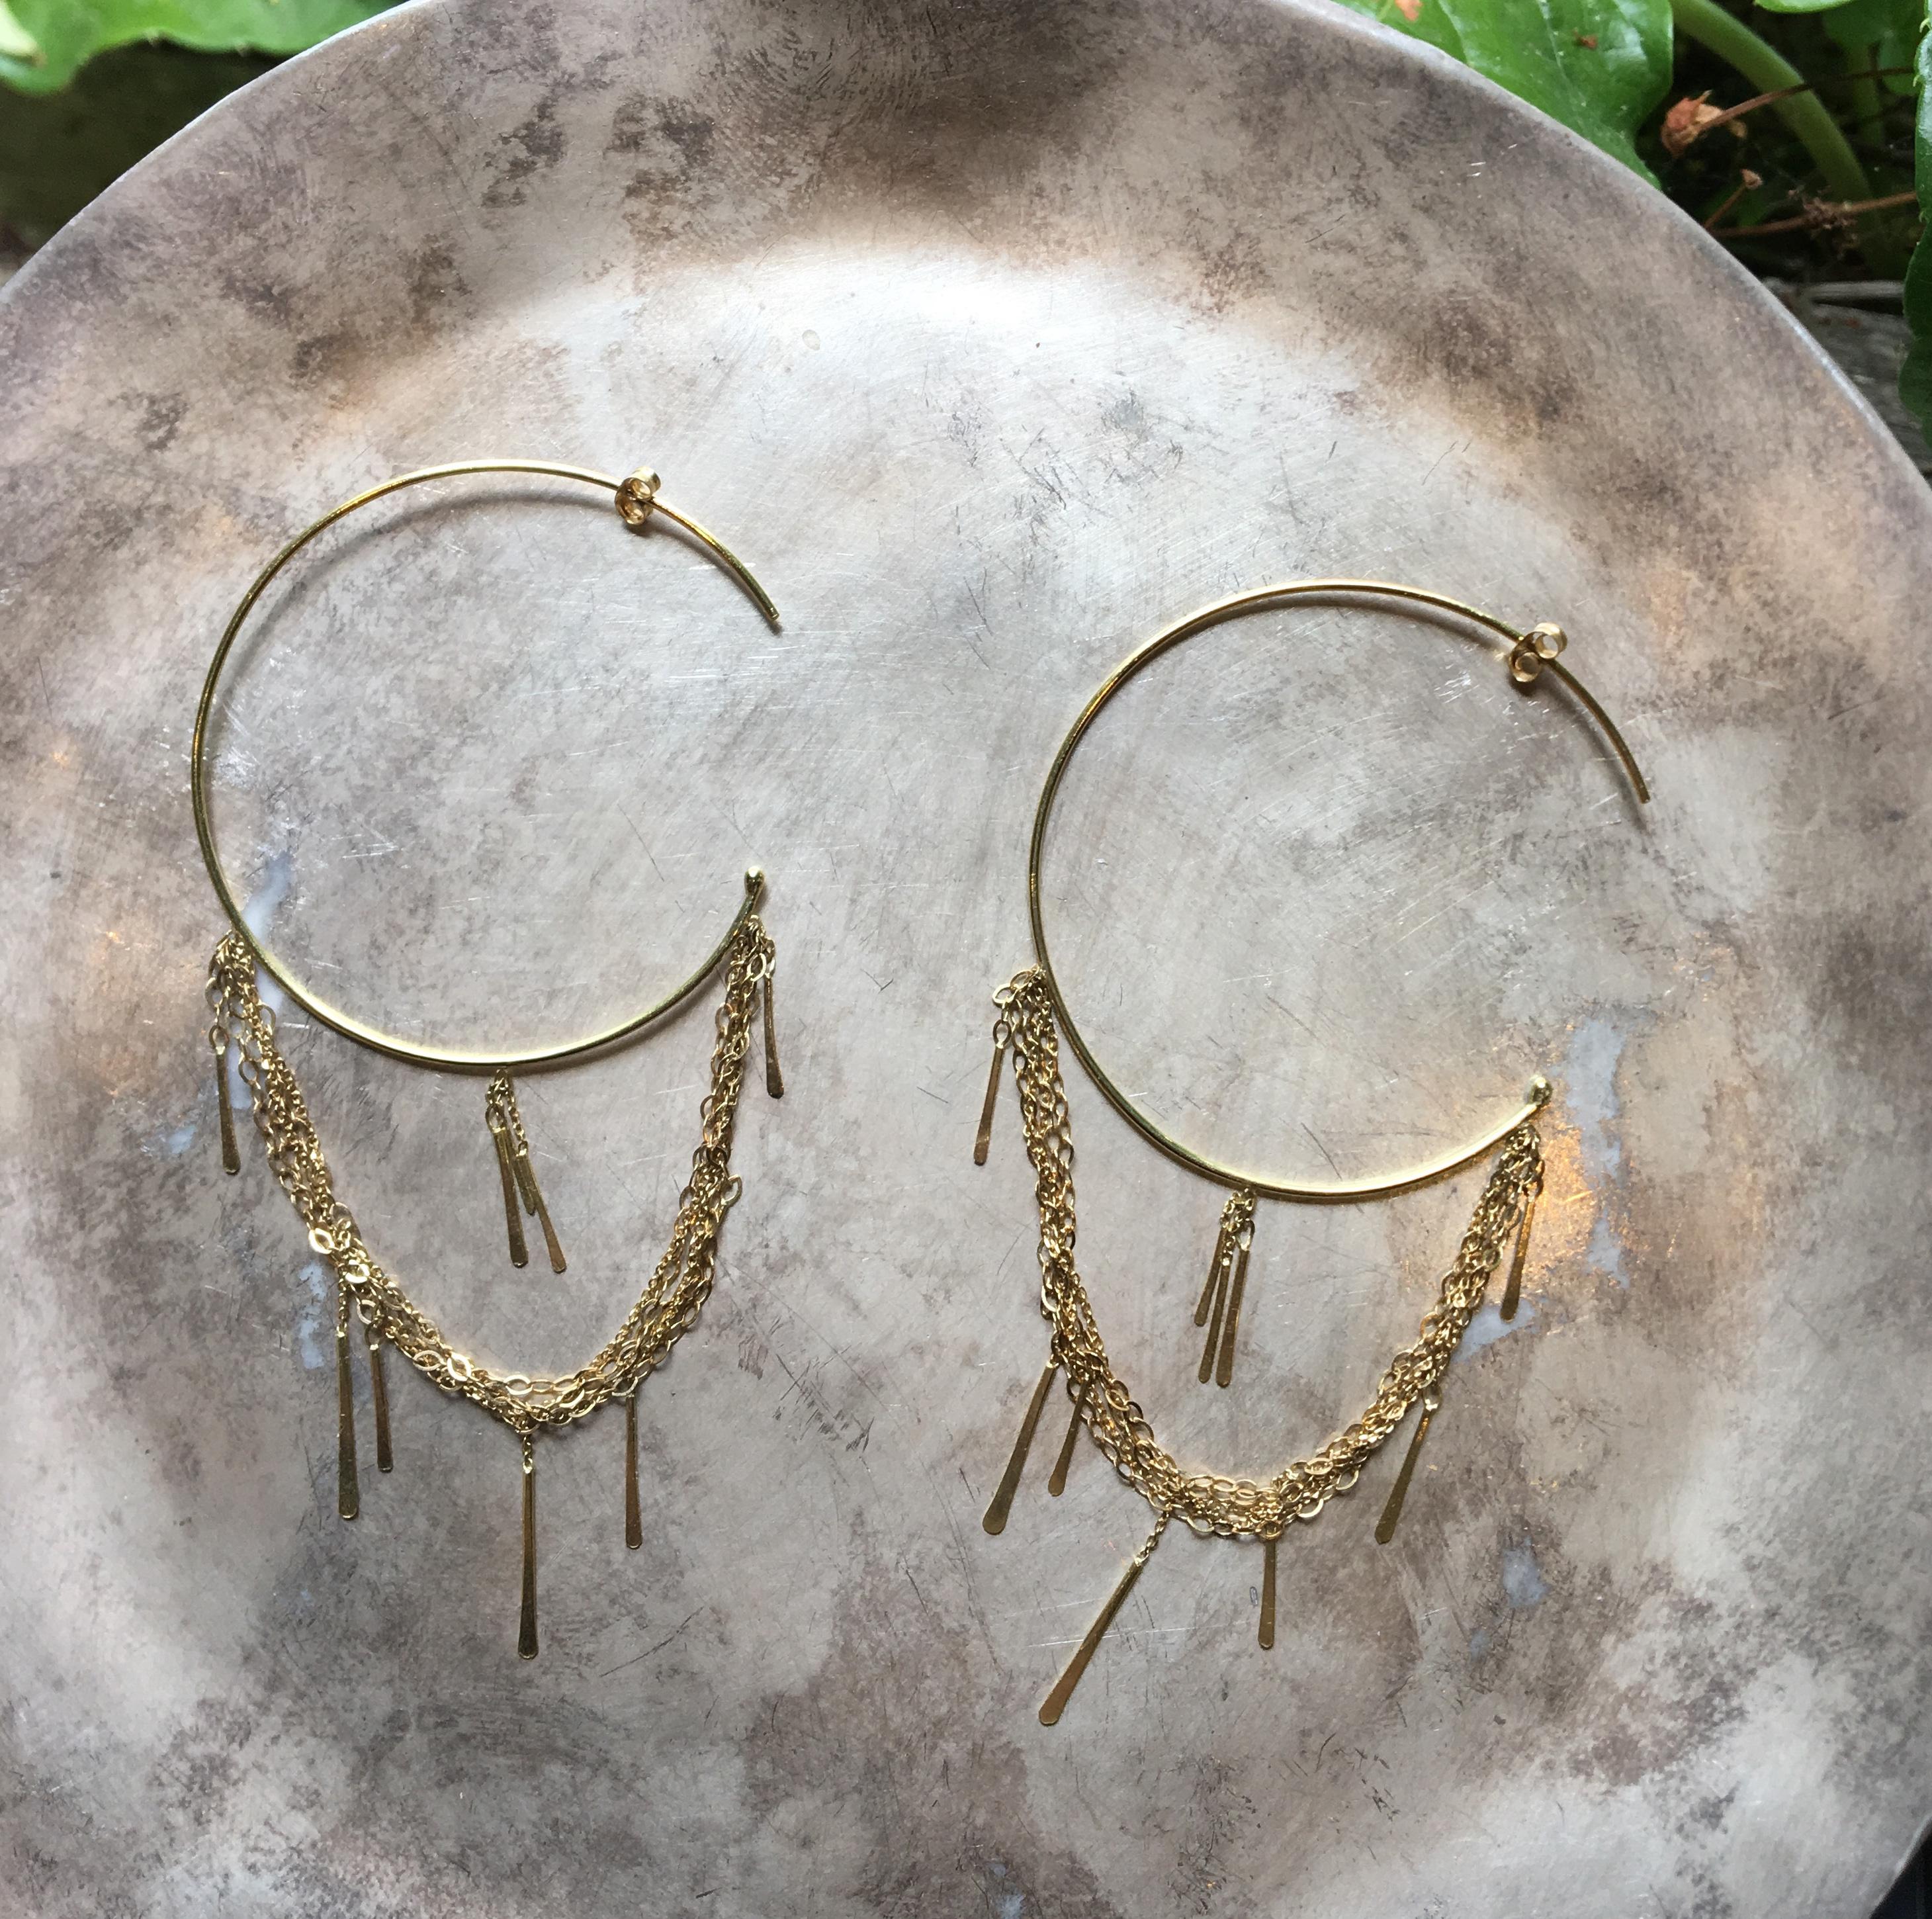 Made from 18k yellow gold with a drape of layered chains with hanging bar details that twinkle in the light, these earrings are very eye-catching. The diameter of the hoops is 3.8cm and the overall length is 8cm. The chains are able to be ordered in